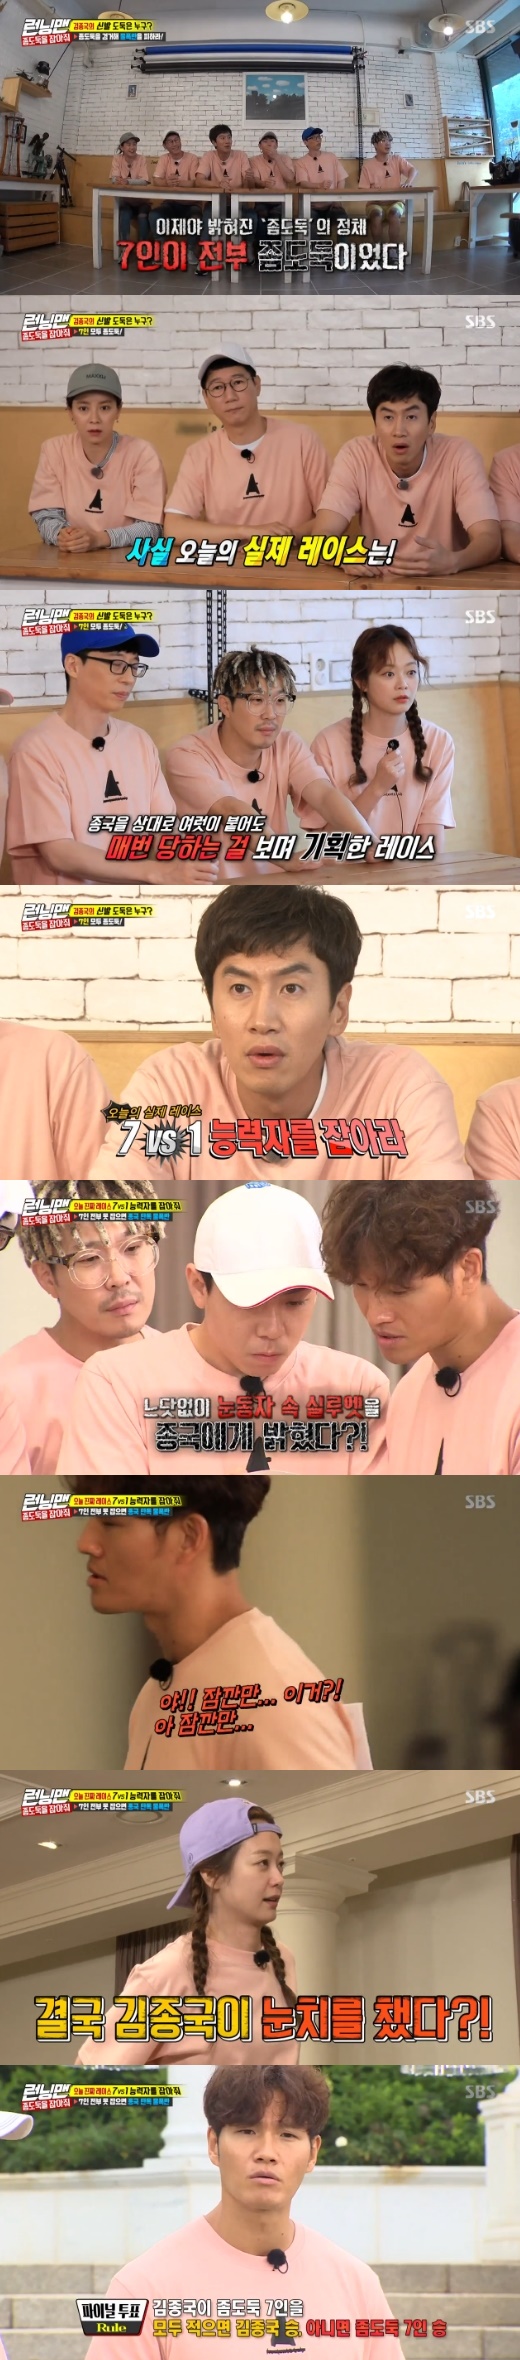 Running Man members played a 7-1 race against the talented Kim Jong-kook.On SBS Running Man broadcast on the 29th, The Little Thief Hold Race was drawn.On this day, the members came to the hint acquisition mission to find a thief who stole Kim Jong-kook shoes.With various missions repeated, Kim Jong-kook continued to doubt Ji Suk-jin.But the Little Thief identity was a reversal.With the mission going on and hints being passed on, The Little Thief was Lee Kwang-soo, Yang Se-chan, Yoo Jae-Suk, Haha, Ji Suk-jin, Song Ji-hyo and Jeon So-min, excluding Kim Jong-kook.That was Catch the Ability to Battle 7-1.The members of the seven had to be unsuspected by Kim Jong-kook that they were accomplices.If Kim Jong-kook did not vote for the entire seven in the final vote, the members won and Kim Jong-kook was subject to a single water bomb penalty.When Kim Jong-kook voted all seven as thieves, the members were penalized; they had to carry out The Little Thief mission as a relay.Kim Jong-kook made a big mistake that Yang Se-chan could give a hint while Murder, She Wrote The Little Thief.Kim Jong-kook, who was hinting at Murder, She Wrote, suspected that he was not one and began to doubt the members.Kim Jong-kook noticed the strange atmosphere of the members and said, Why do not you do Murder, She Wrote? The atmosphere is strange and does not speak too much.Members were left gibberish in embarrassment at Kim Jong-kook Murder, She Wrote.Eventually Kim Jong-kook won by pointing the entire member to The Little Thief.Seven people, except Kim Jong-kook, were hit by water bombs, and Kim Jong-kook was punished for a trouble.